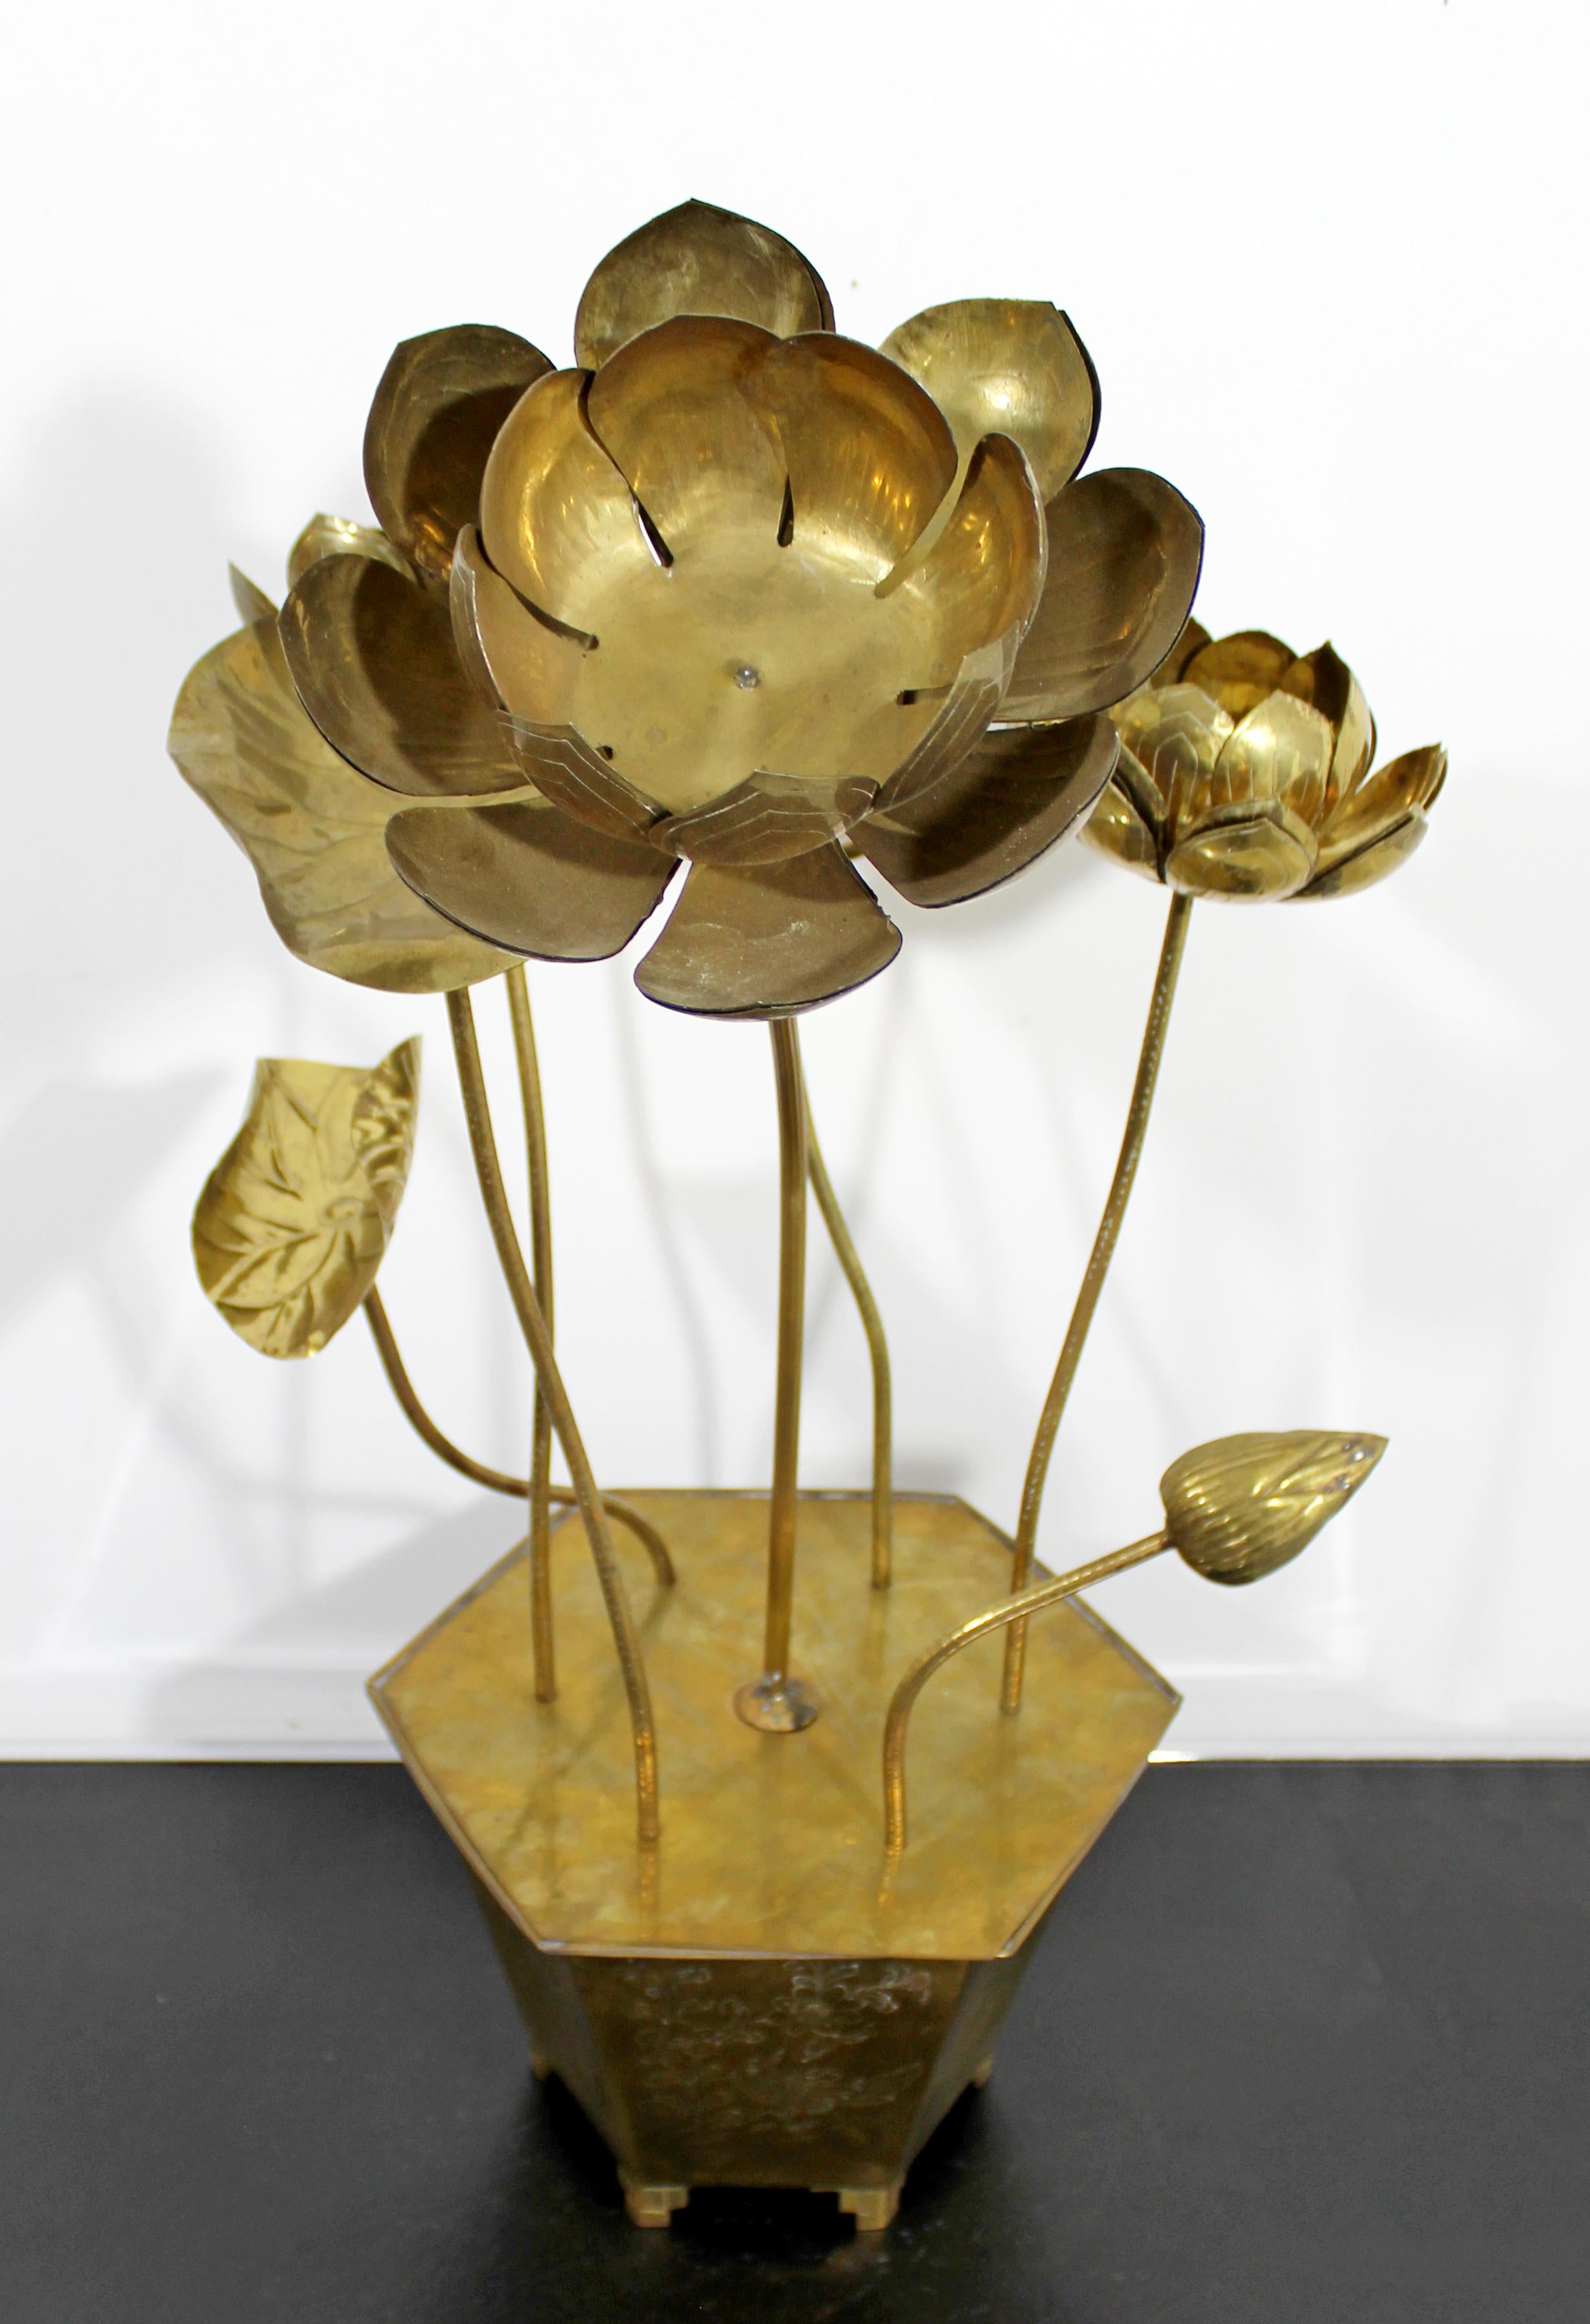 For your consideration is an absolutely stunning, etched brass chinoiserie adjustable Lotus table sculpture , by Feldman Lighting Co, circa 1970s. In excellent vintage condition. The dimensions are 12.5